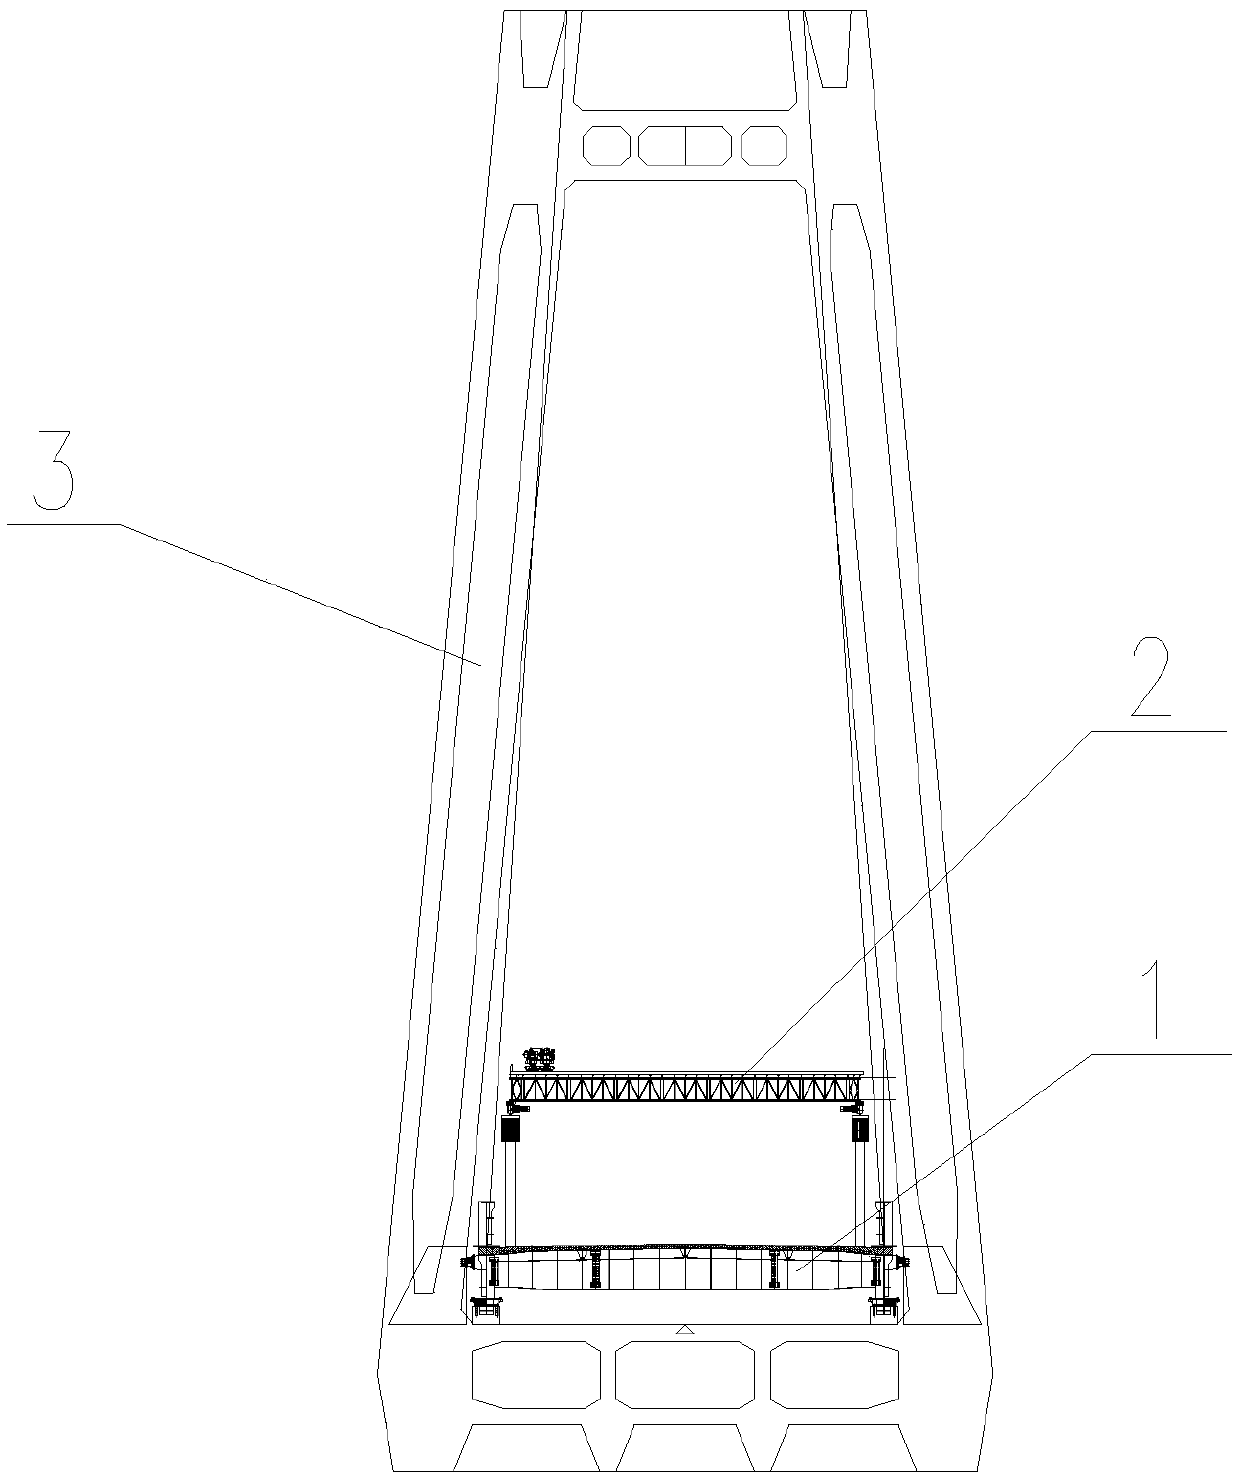 Construction technology of deck crane for hoisting entire segment of composite girder of cable-stayed bridge based on eccentric load lateral movement